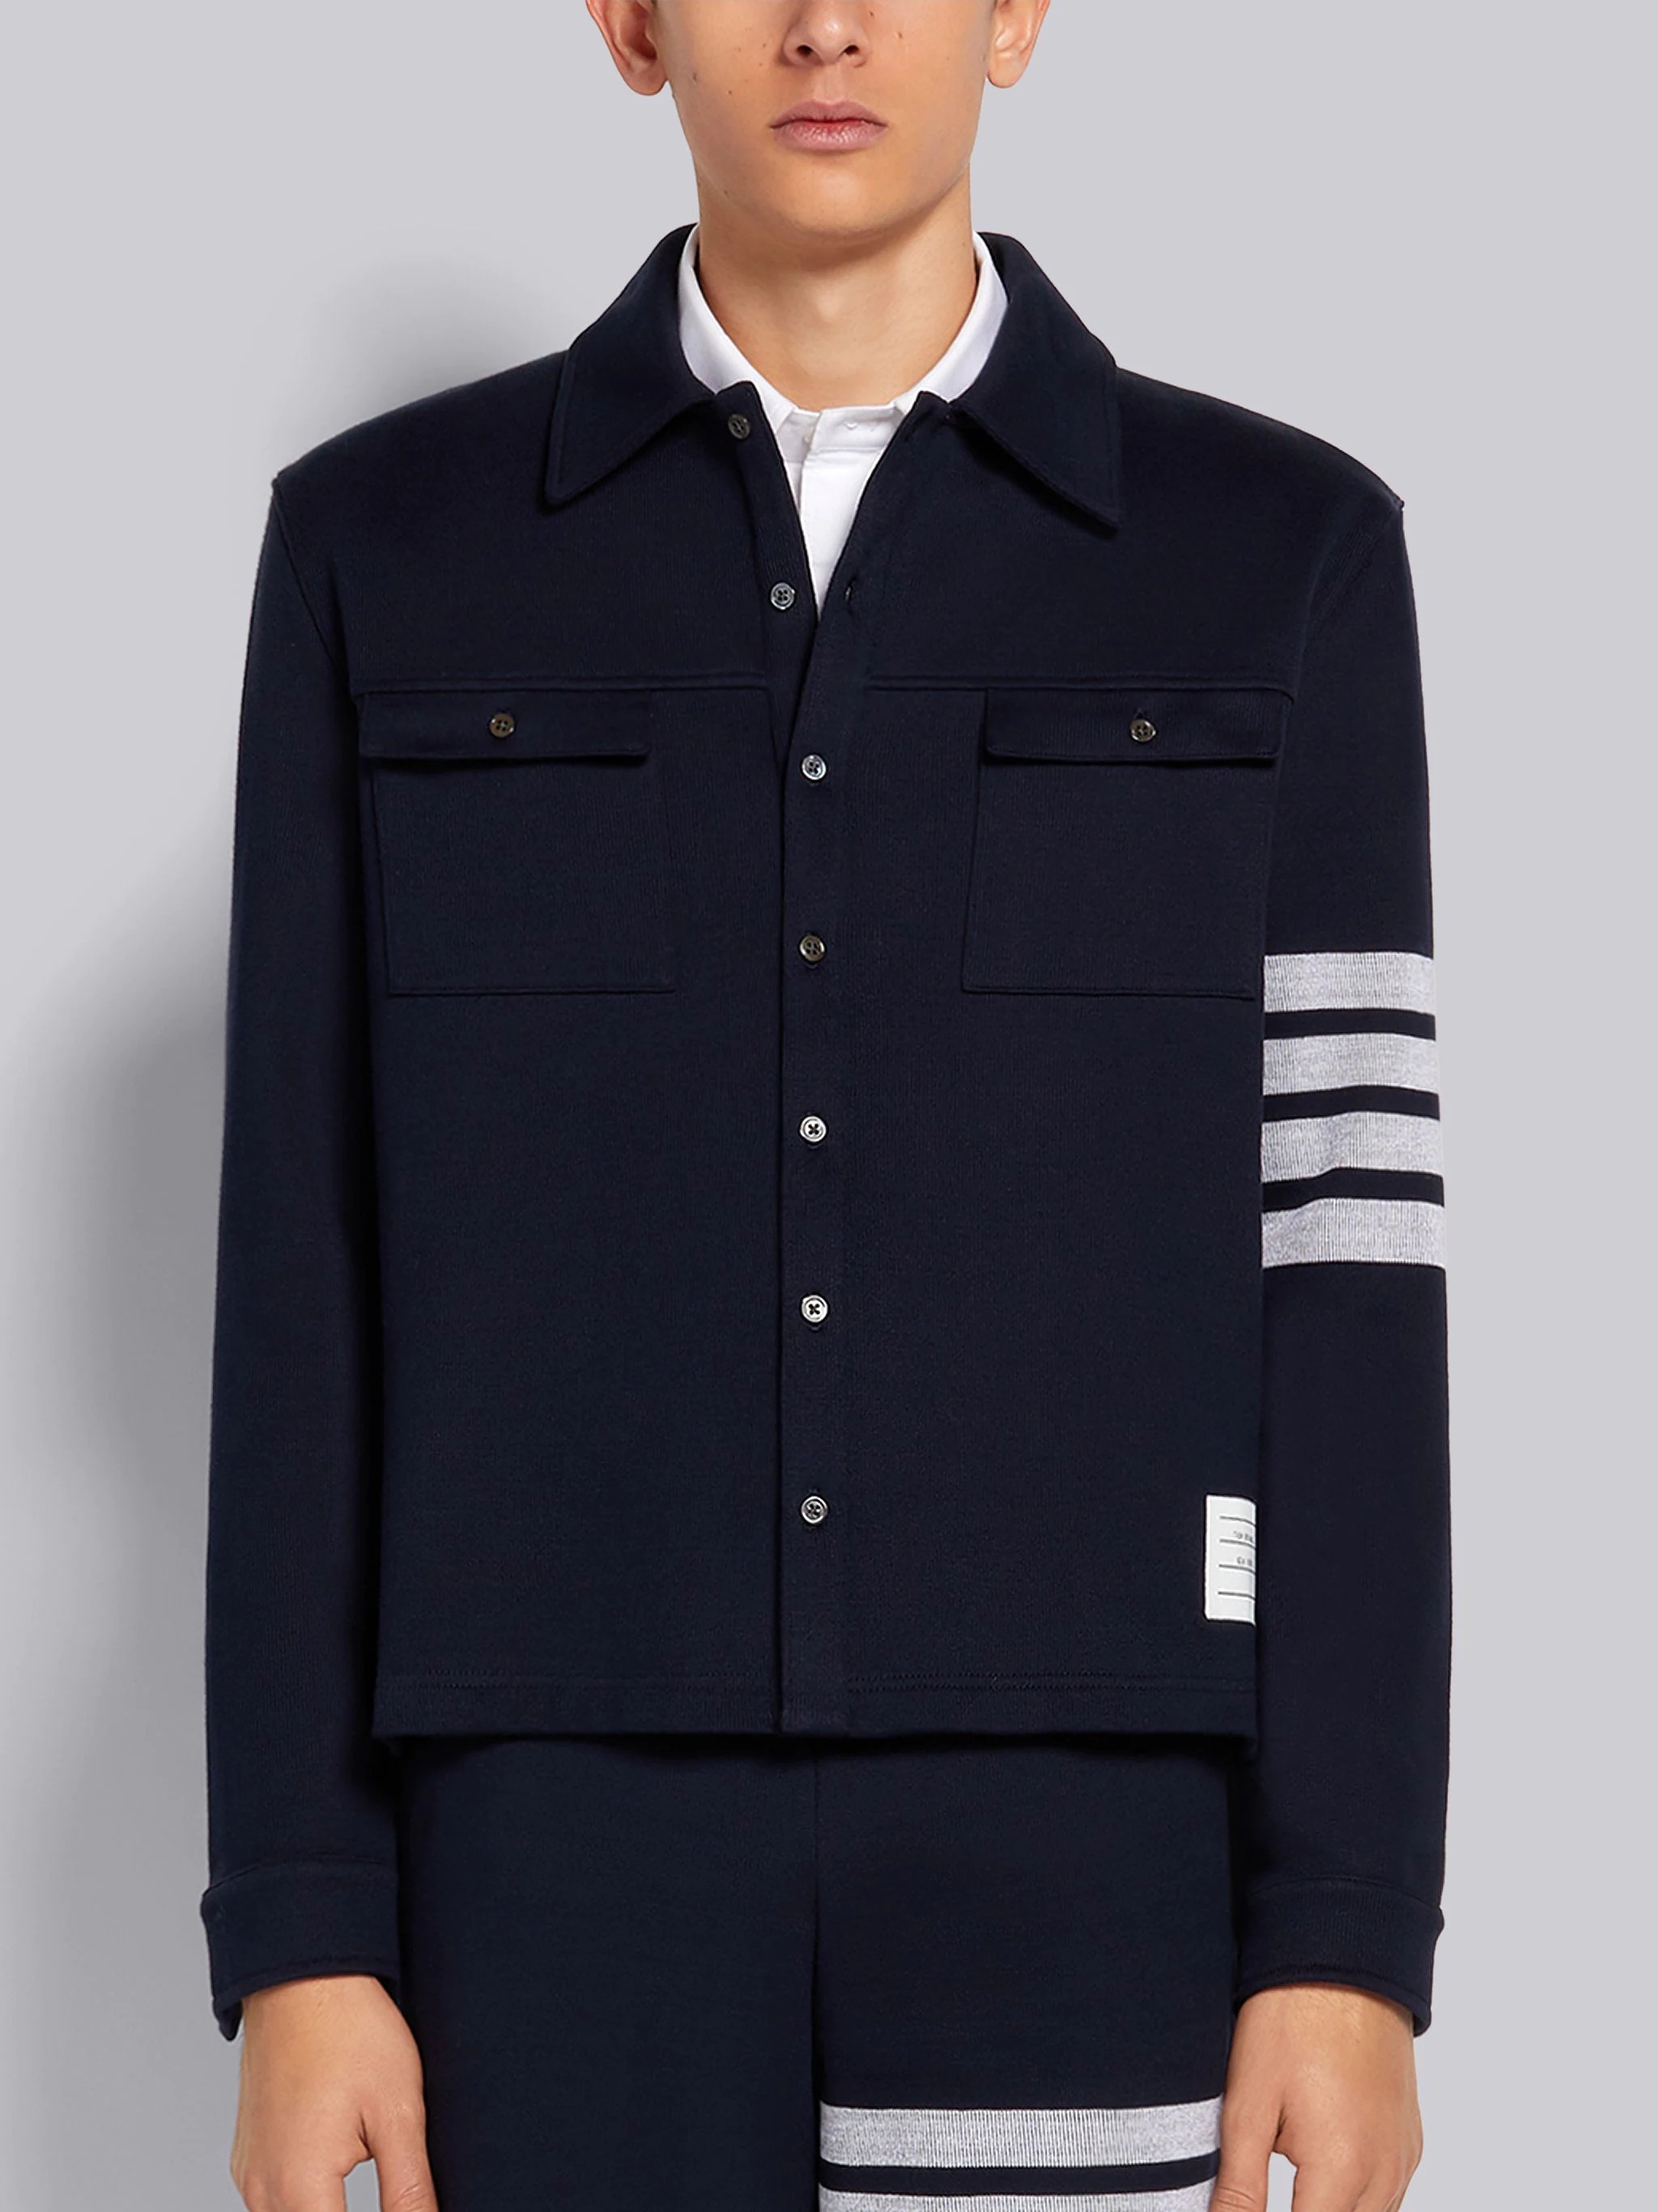 THOM BROWNE - Double Face Wool Cardigan Jacket